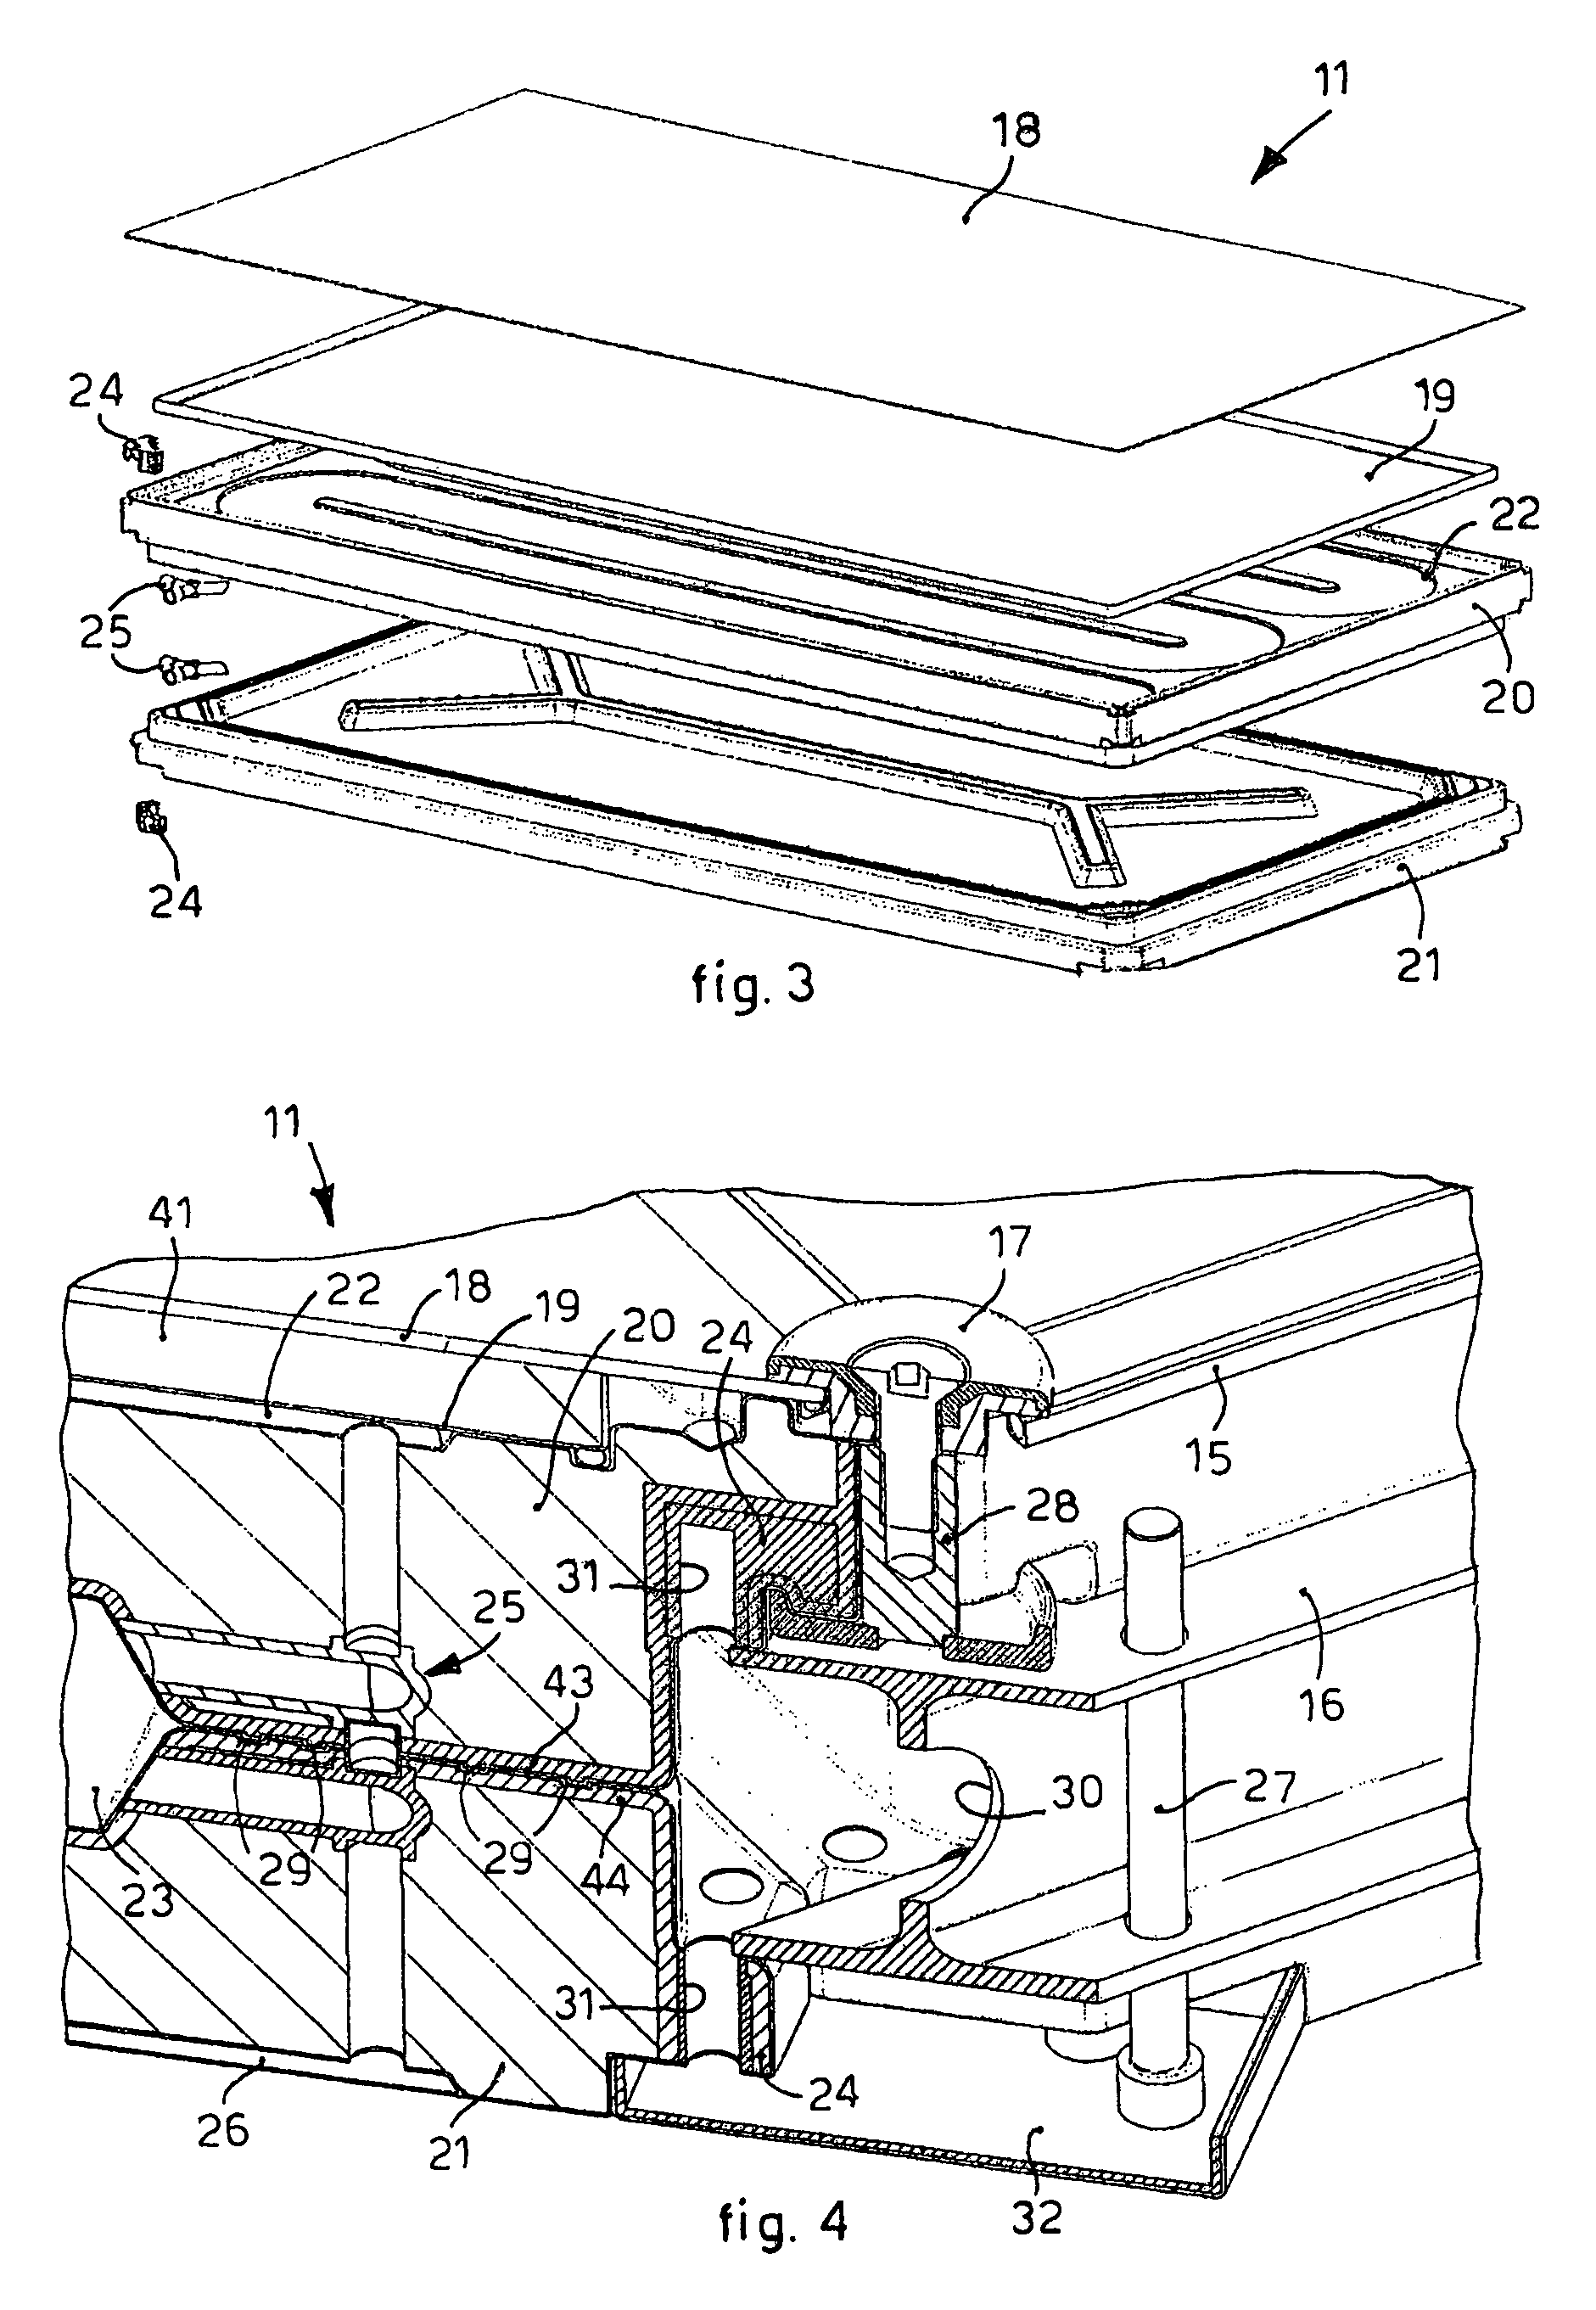 Modular panel for making covering structures for walls, covering structures or walls and method